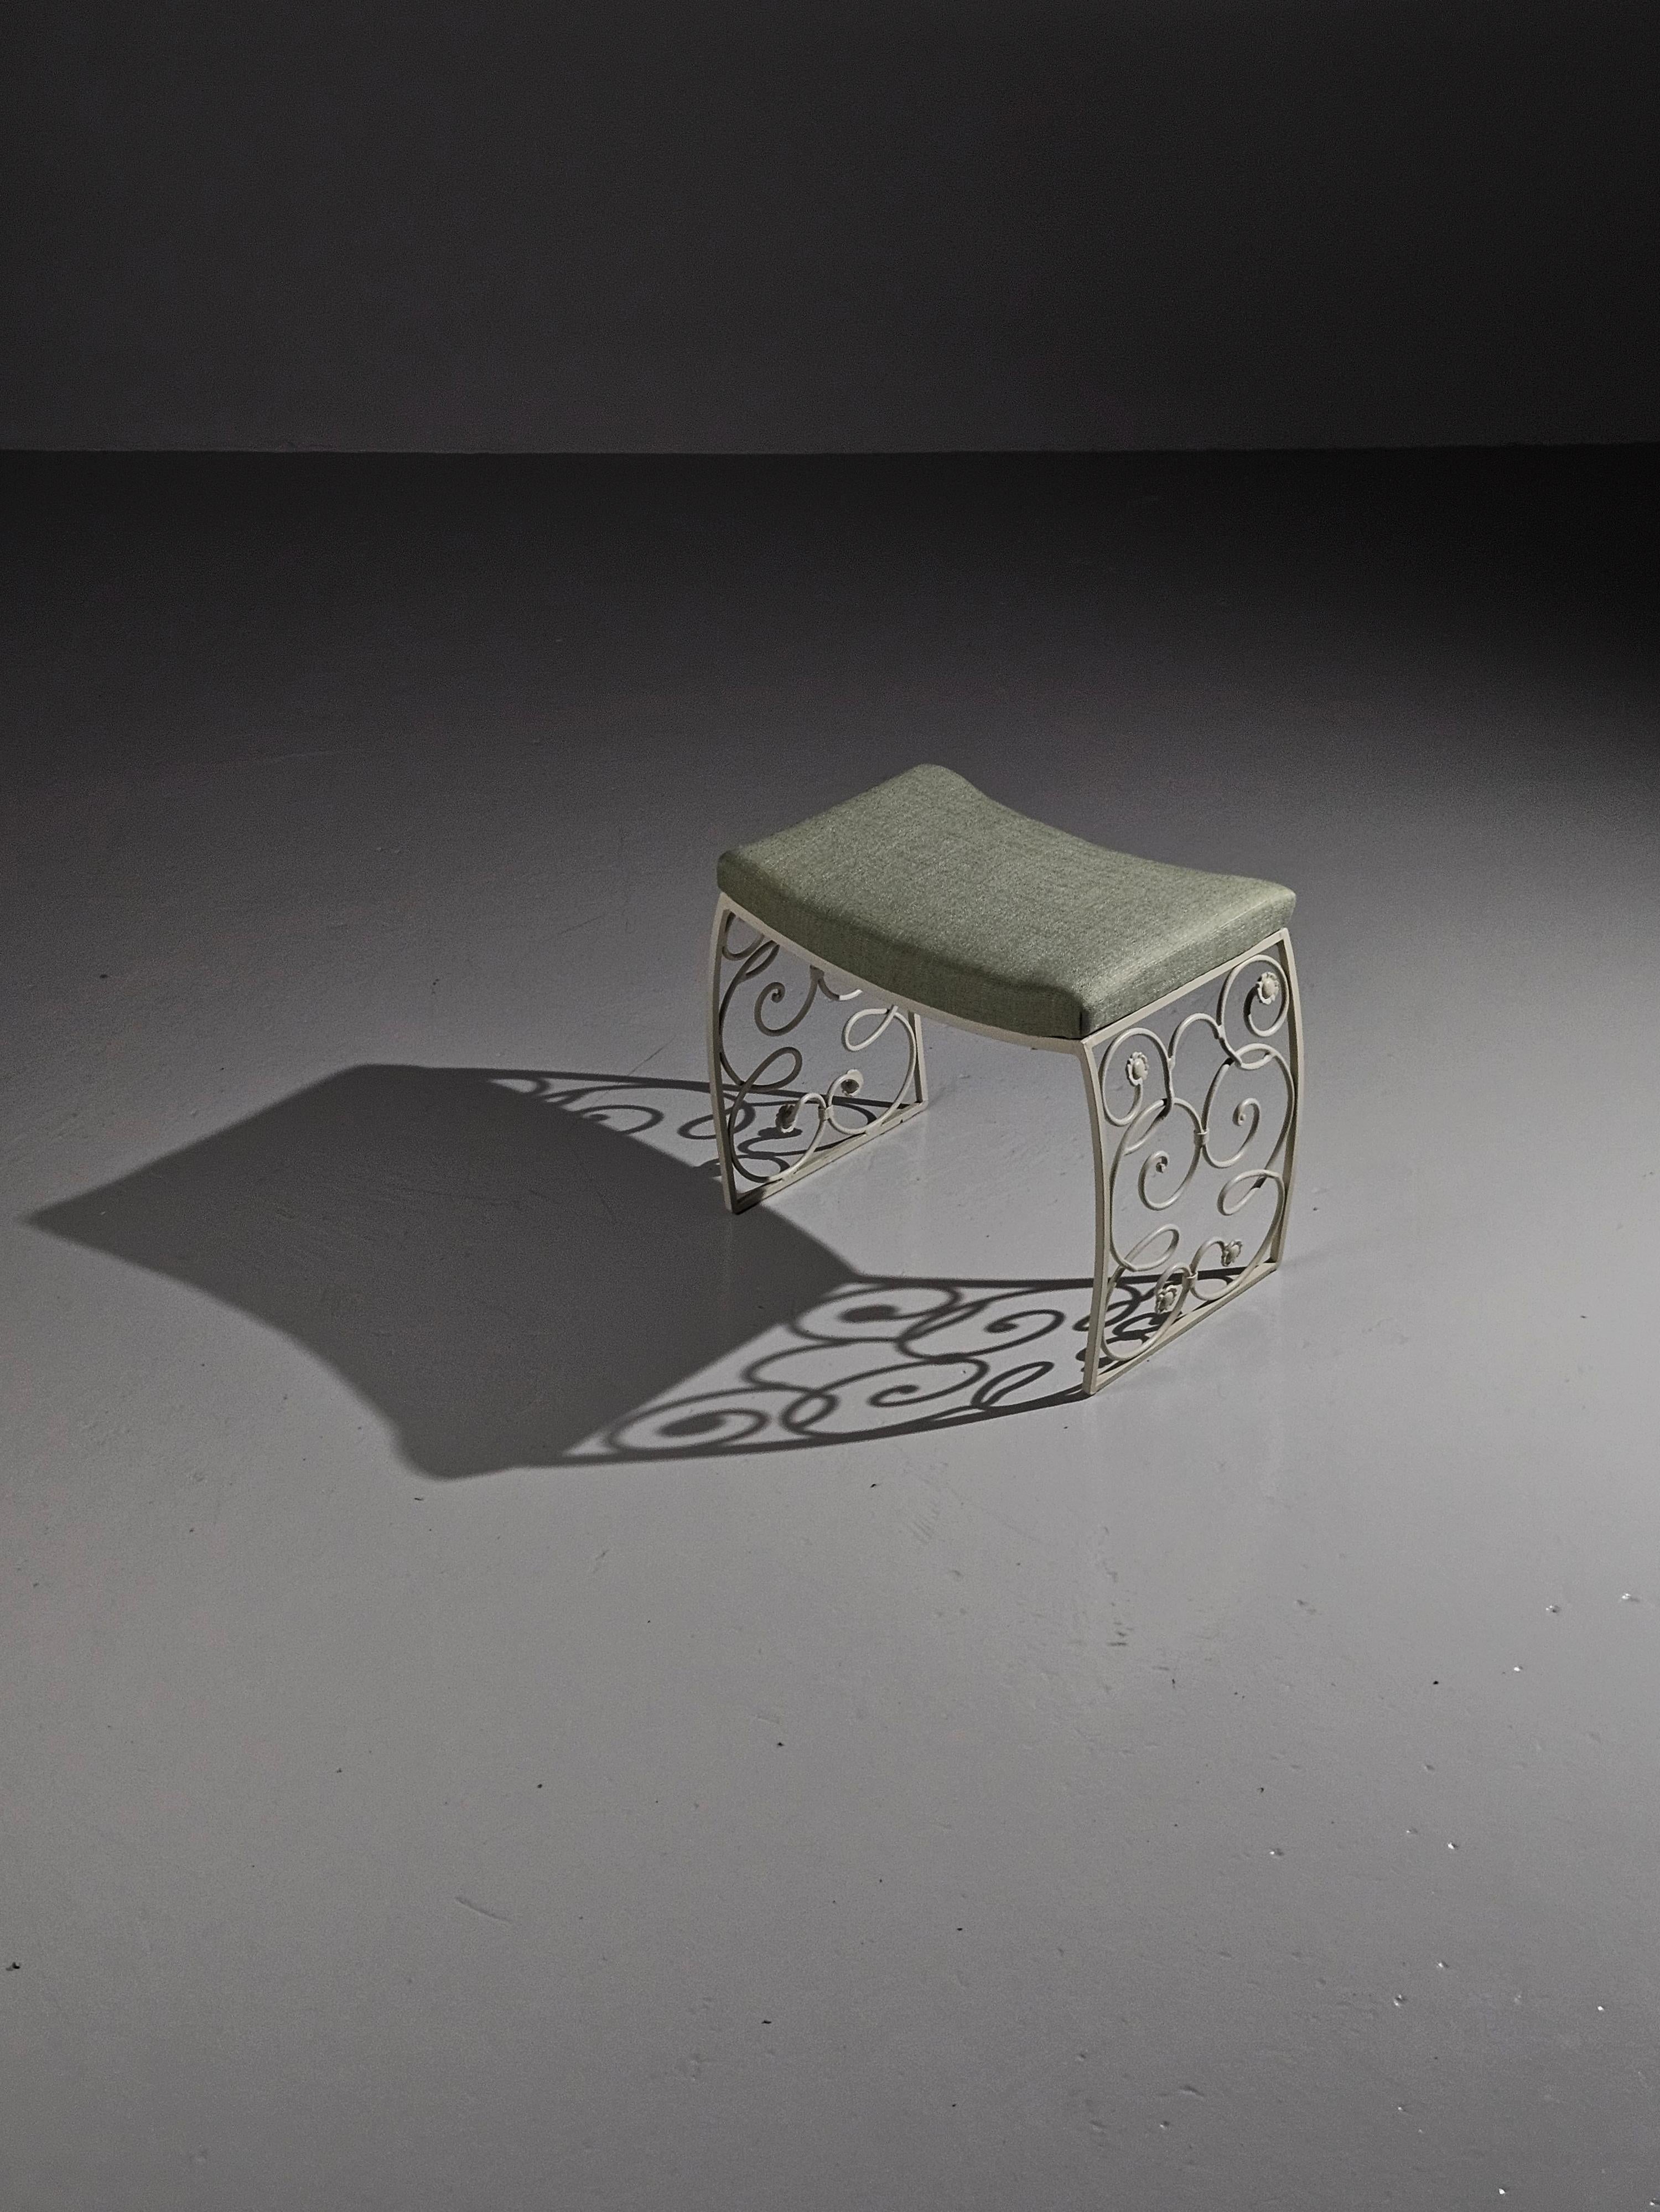 Great stool designed by Tor Wolfenstein for Ditzinger and produced by Bjerkås, Sweden, during the 1940s. 

Lovlely shape in iron with decorative flower elements.